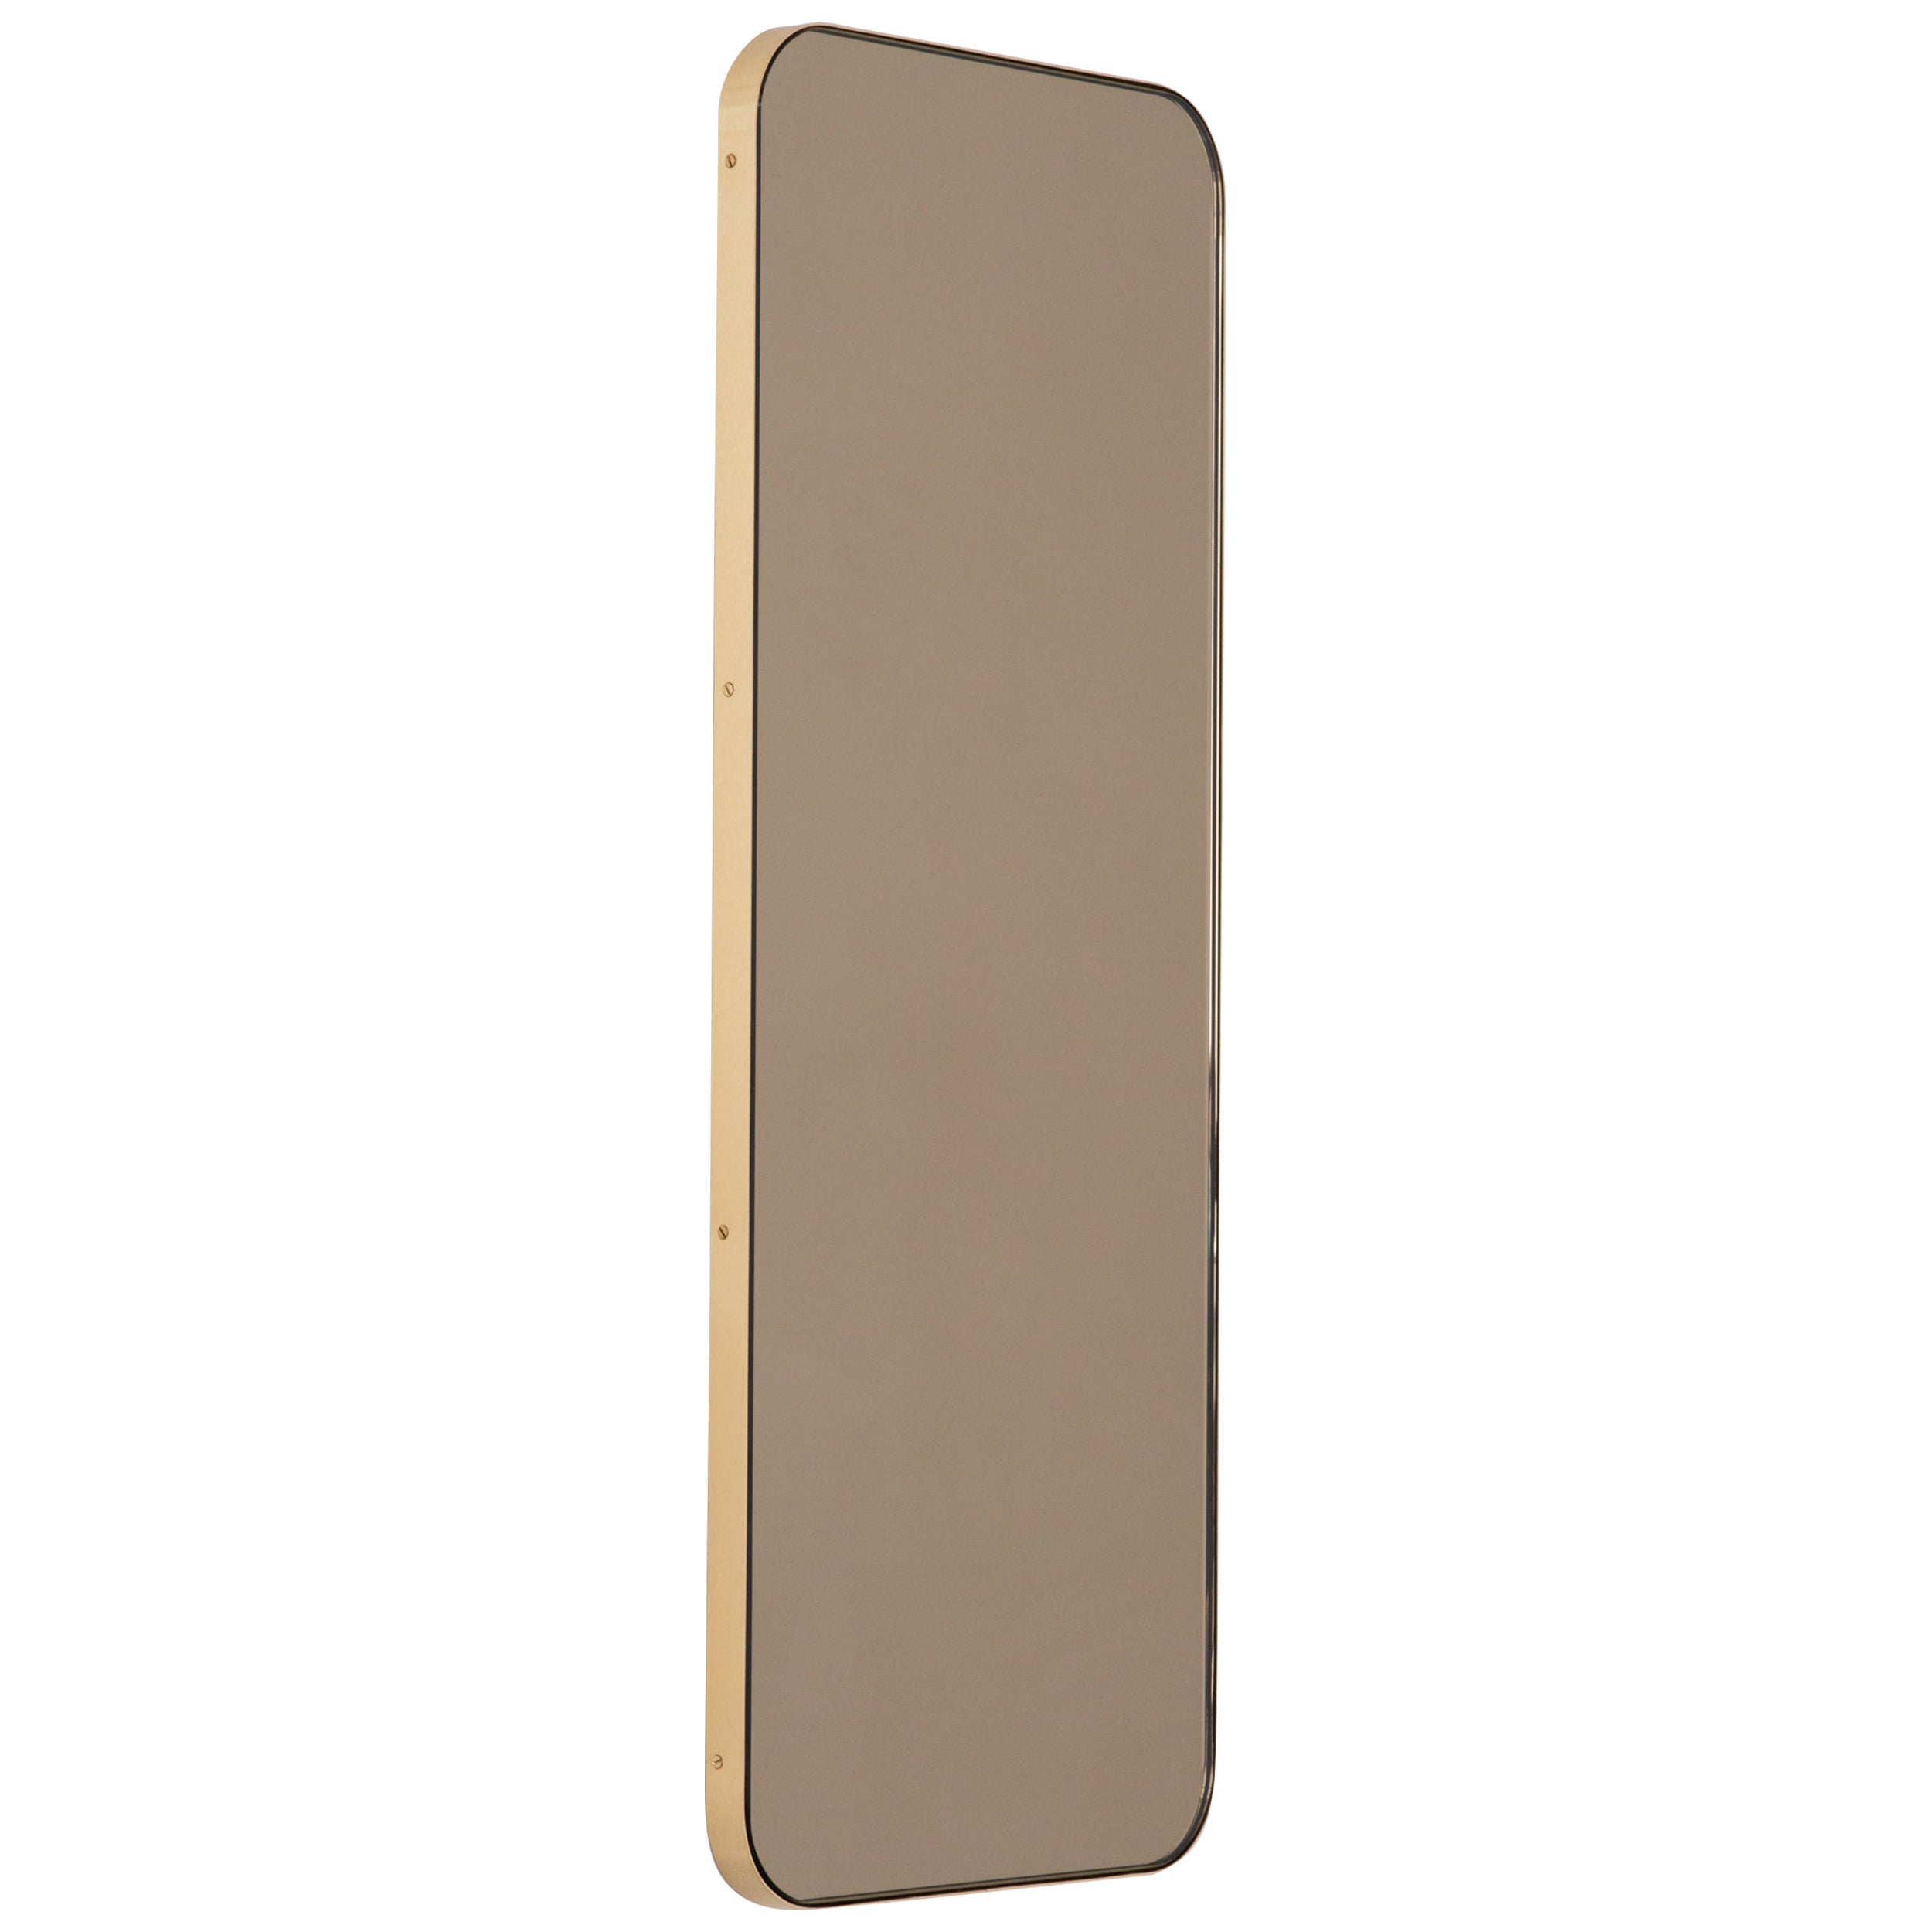 Quadris Bronze Tinted Rectangular Contemporary Mirror with a Brass Frame, Large For Sale